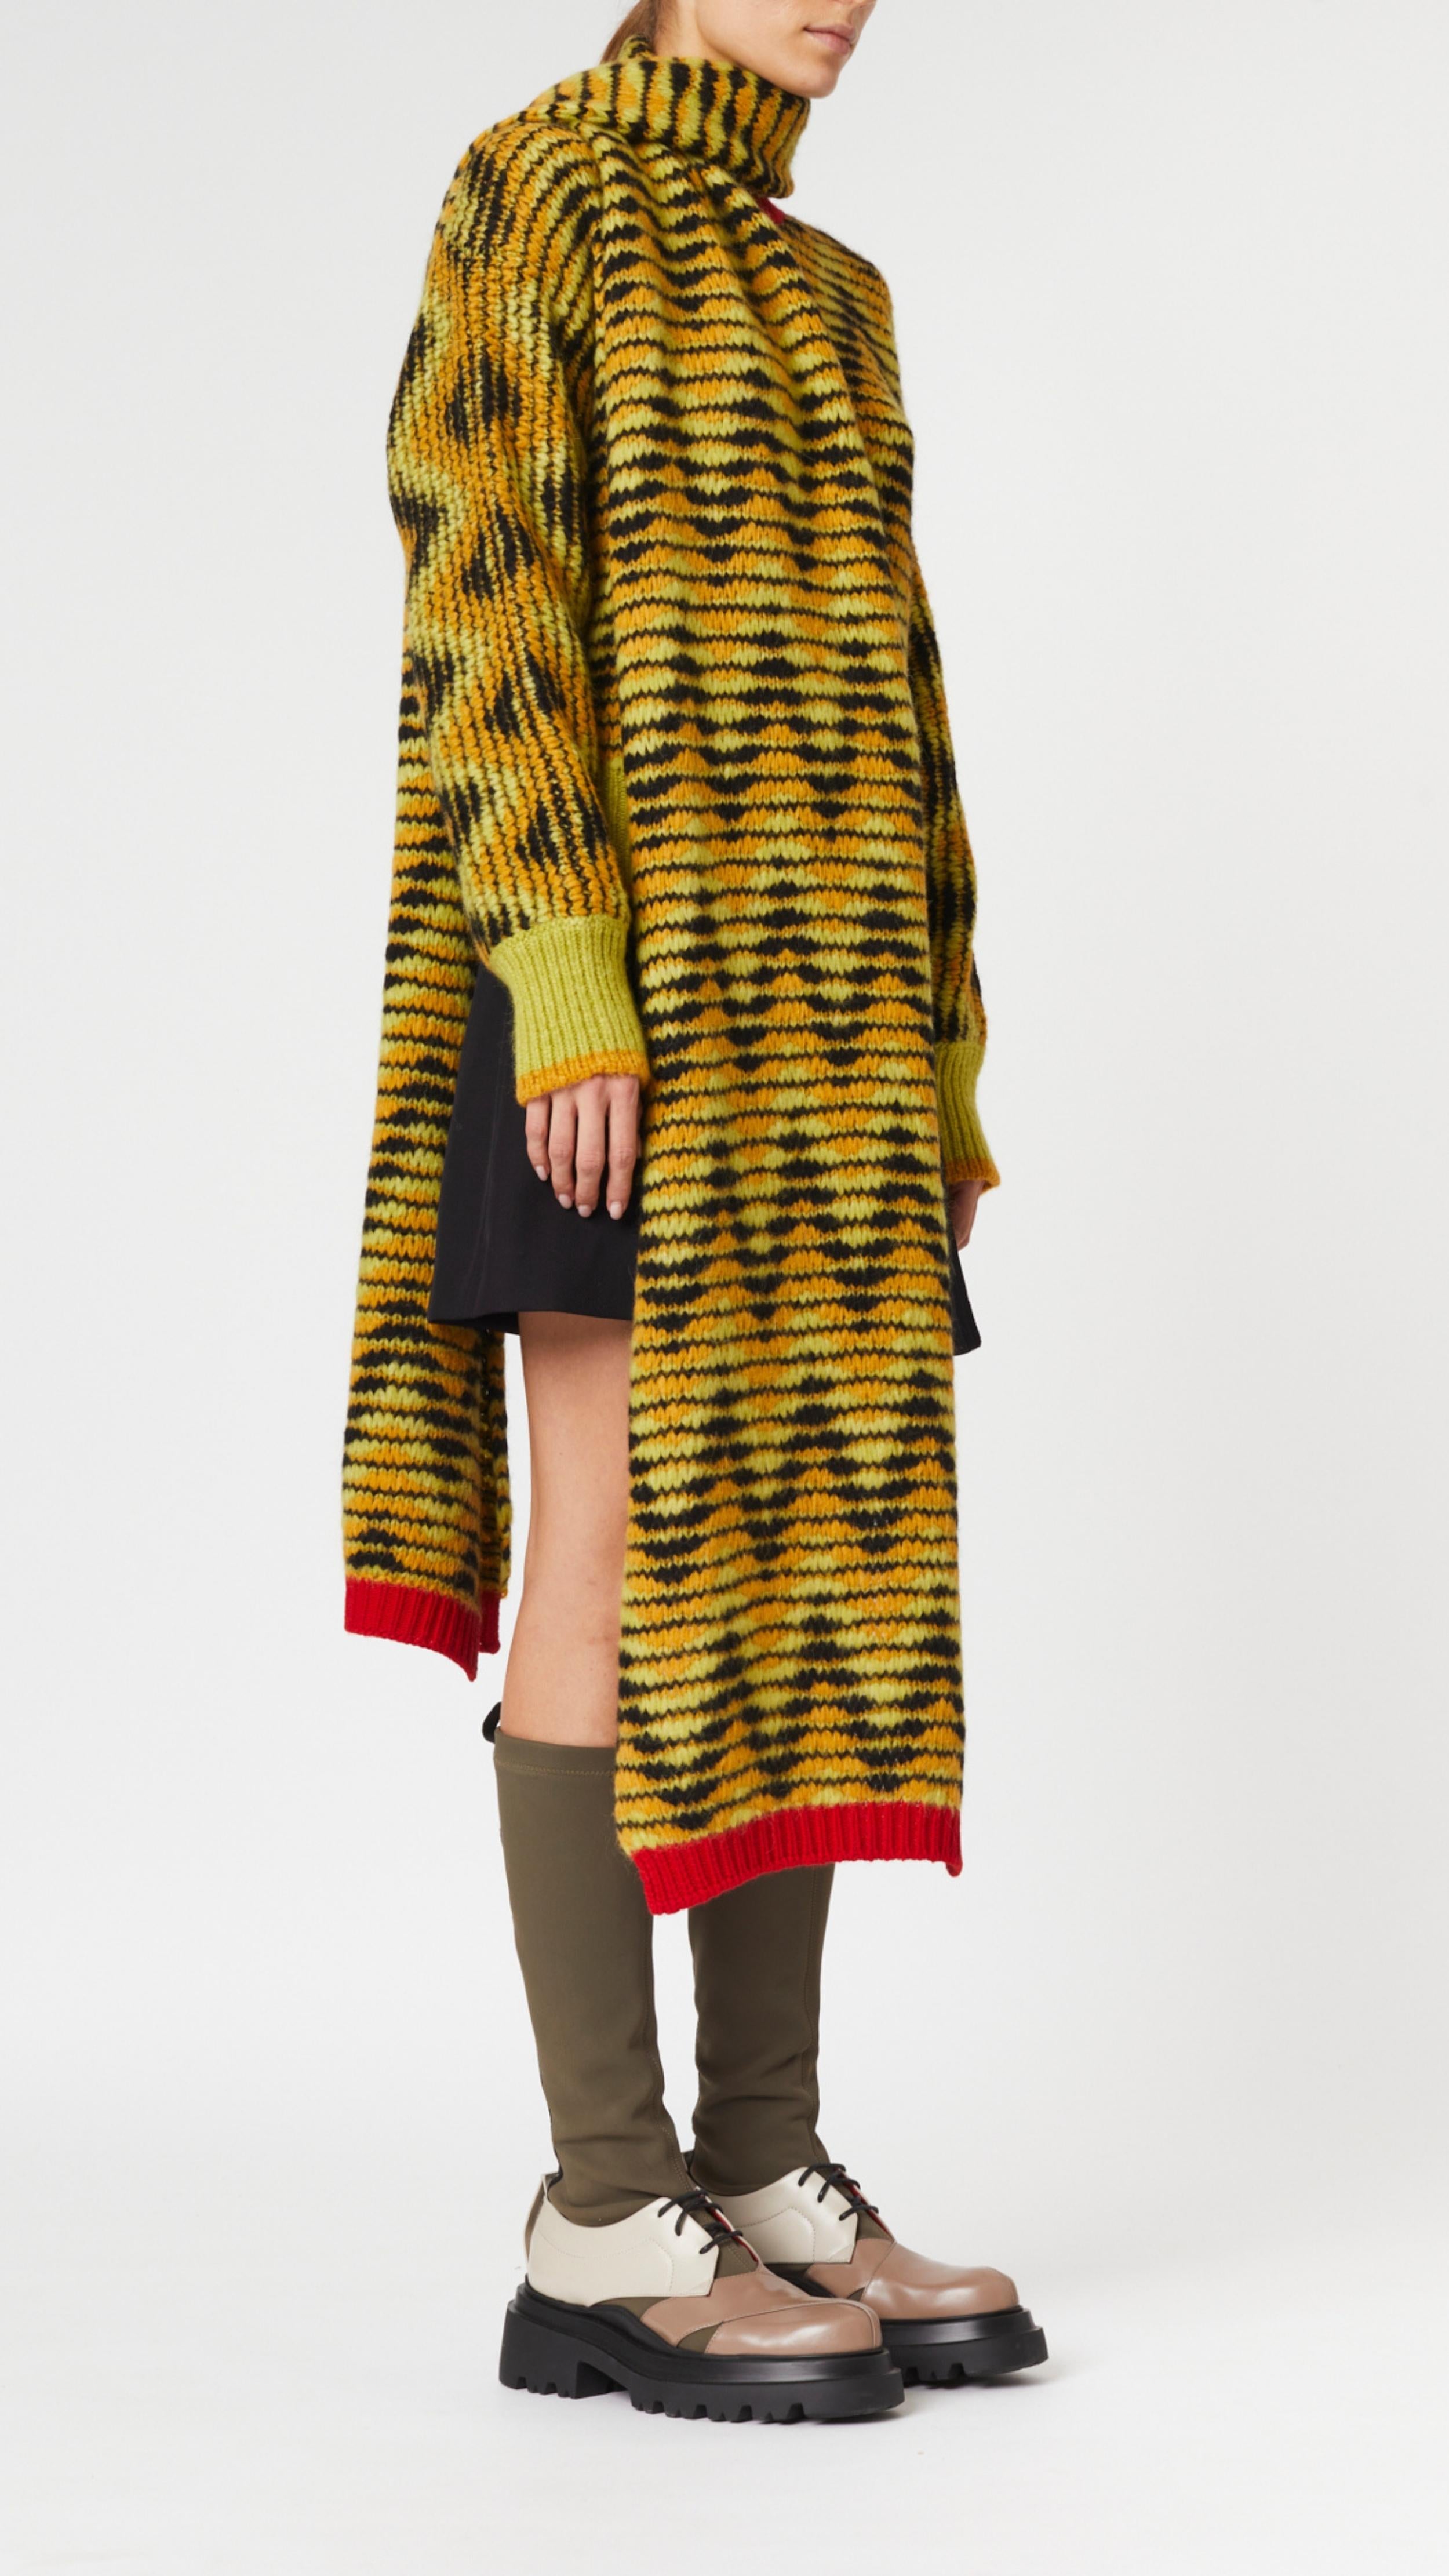 Plan C Jacquard Knit Oversize Scarf in pistachio, black and ochre colored chevron V pattern. Pop of red at the trim. Super oversized made from soft alpaca and wool blend. Photo shown on model wearing it with matching Long Sleeve Jacquard Knit Sweate 